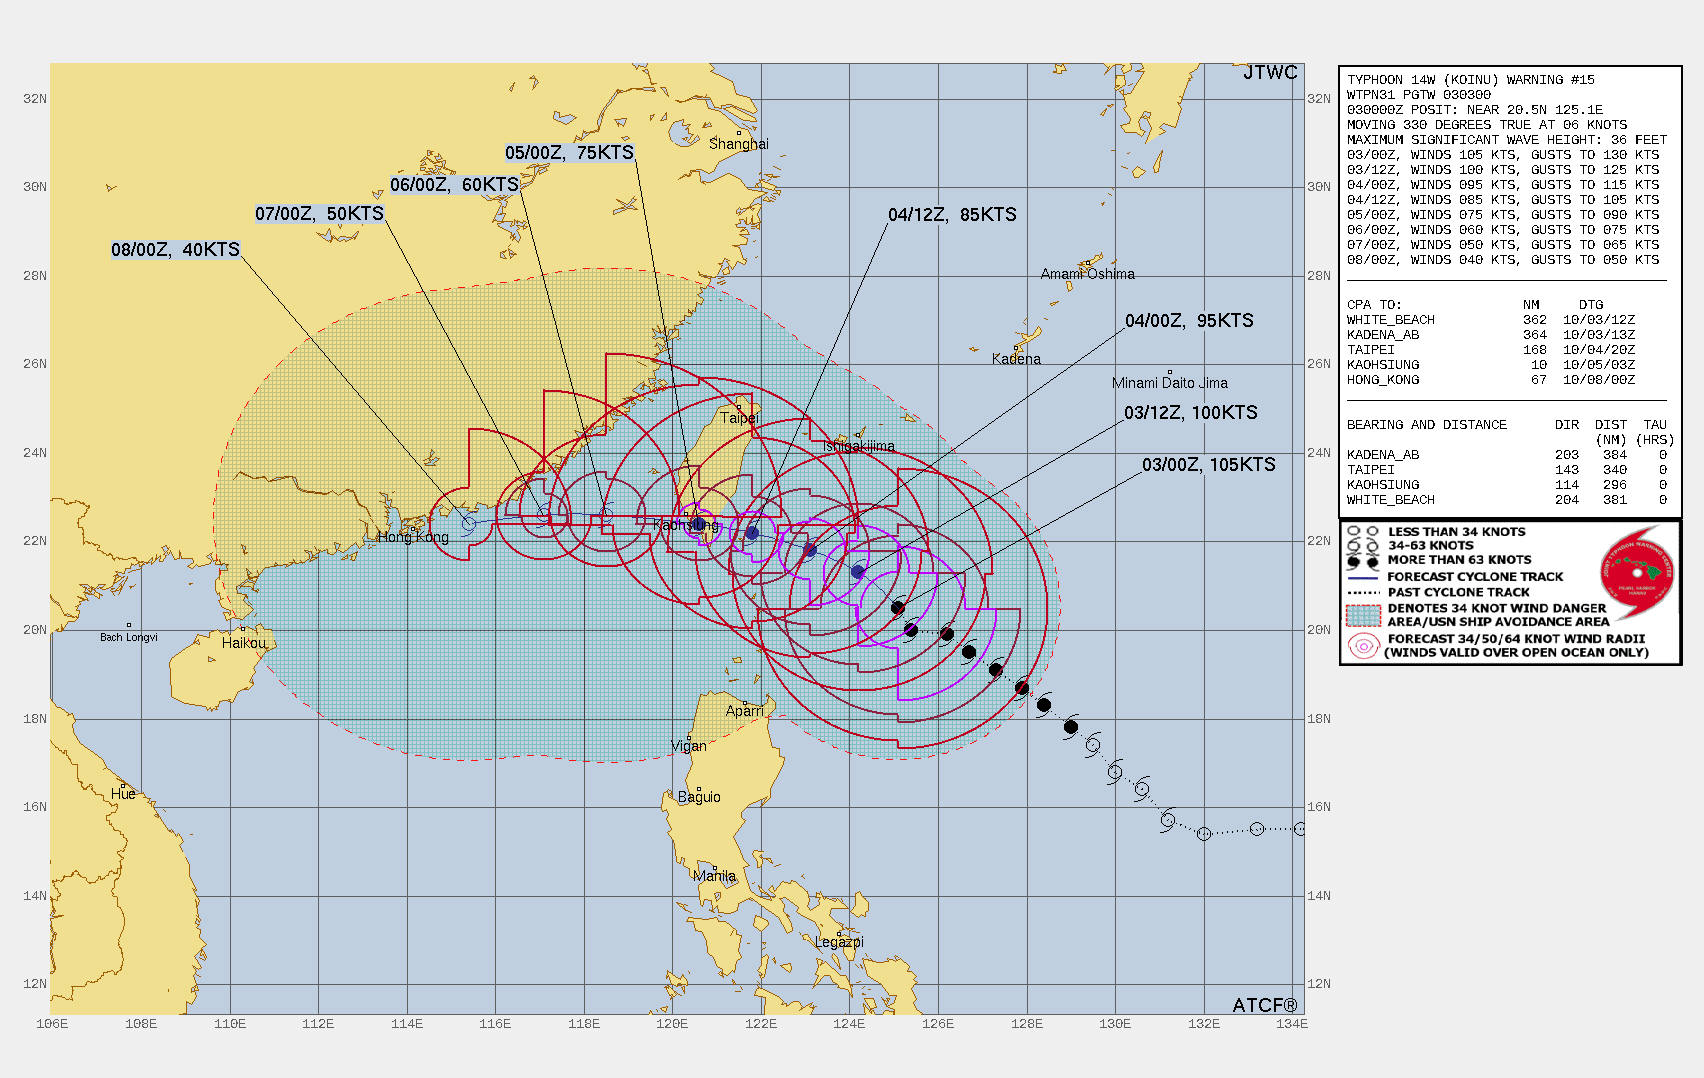 FORECAST REASONING.  SIGNIFICANT FORECAST CHANGES: THERE ARE NO SIGNIFICANT CHANGES TO THE FORECAST FROM THE PREVIOUS WARNING.  FORECAST DISCUSSION: TYPHOON (TY) 14W IS FORECAST TO TRACK NORTHWESTWARD ALONG THE SOUTHWESTERN PERIPHERY OF THE STR THROUGH TAU 12 TOWARD A BREAK IN THE STR ASSOCIATED WITH A MIDLATITUDE SHORTWAVE TROUGH. AFTER TAU 12, THE TROUGH WILL PROPAGATE EASTWARD ALLOWING THE STR TO REBUILD TO THE NORTH, WHICH WILL TURN THE SYSTEM ON A WEST-NORTHWESTWARD TO WESTWARD TRAJECTORY THROUGH TAU 120. TY 14W SHOULD WEAKEN STEADILY DUE TO THE PERSISTENT VWS AS IT APPROACHES AND TRACKS OVER SOUTHERN TAIWAN WITH FURTHER WEAKENING AS IT TRACKS OVER THE SOUTH CHINA SEA, TAIWAN STRAIT REGION. A WEAK NORTHEAST SURGE IS EXPECTED TO BUILD INTO THE TAIWAN STRAIT WITH EXPANSIVE GALE-FORCE WINDS AND INFUSION OF COOLER, DRIER, MORE STABLE  AIR.